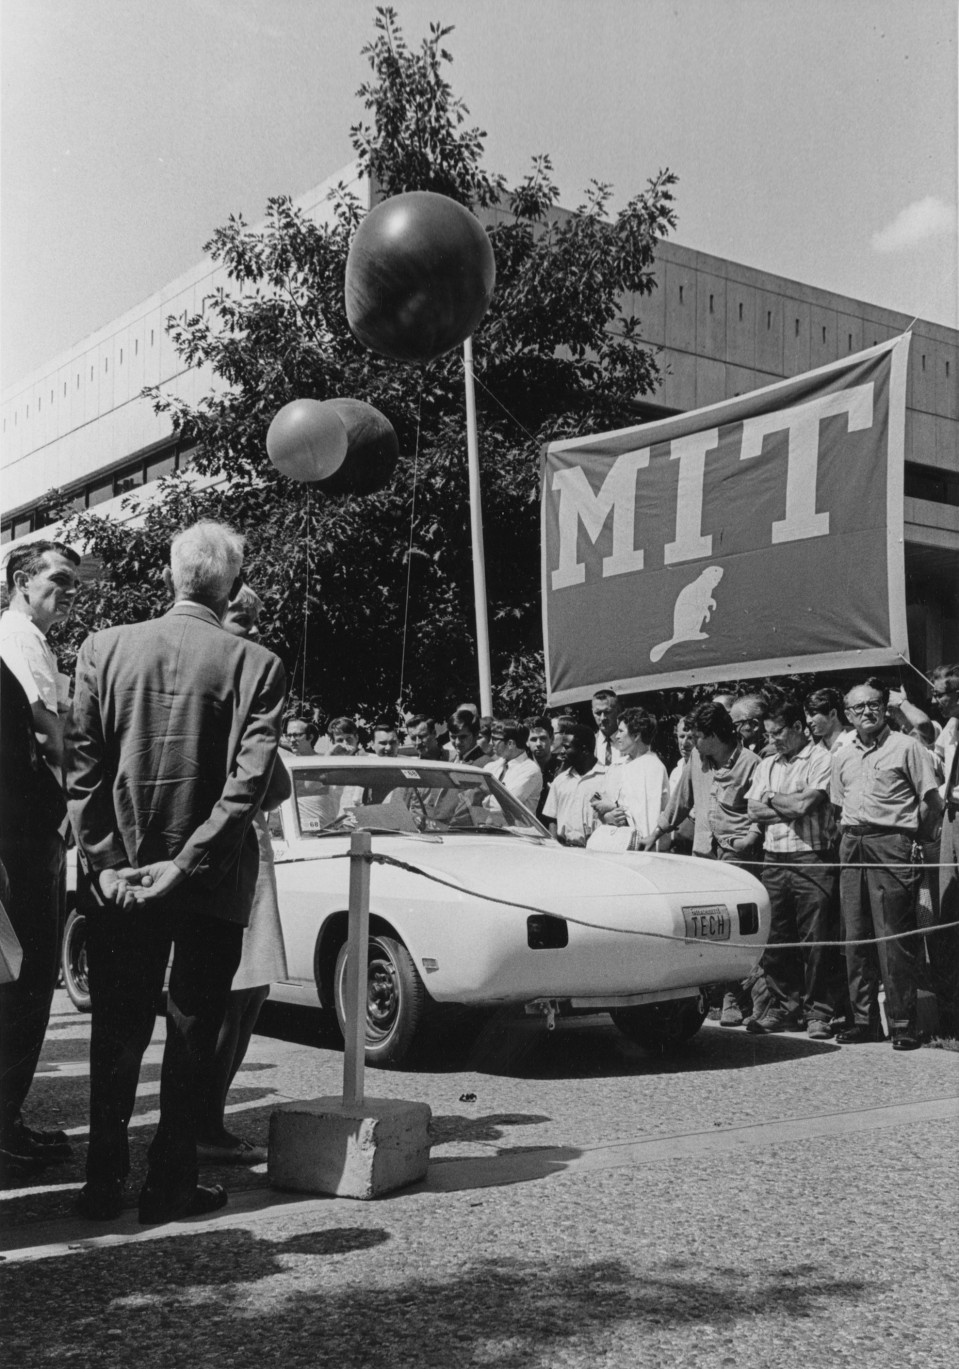 Electric car at MIT ceremony